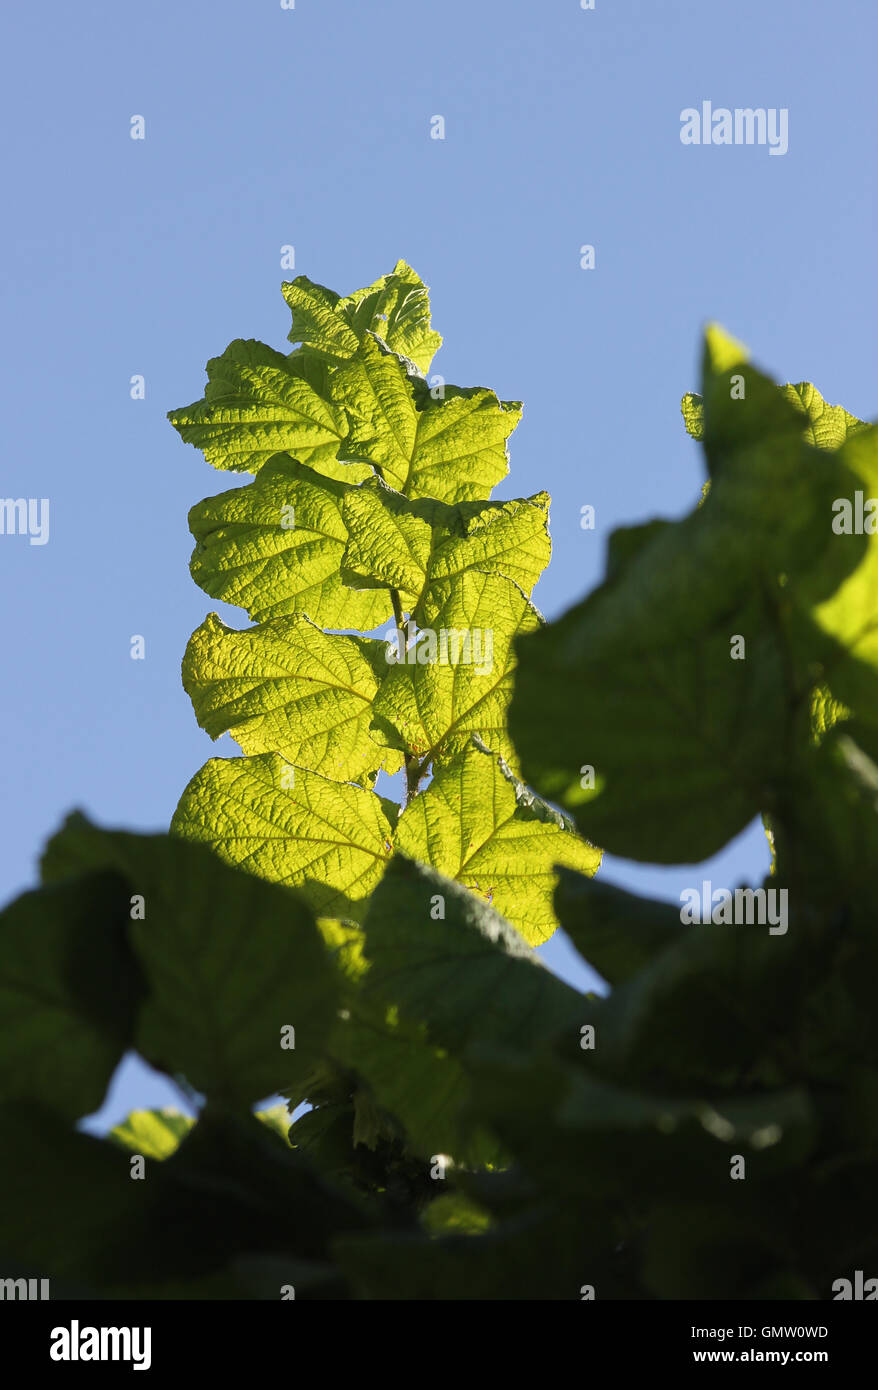 Sunlit common hazel (Corylus avellana) branch and leaves seen from below against a blue sky Stock Photo